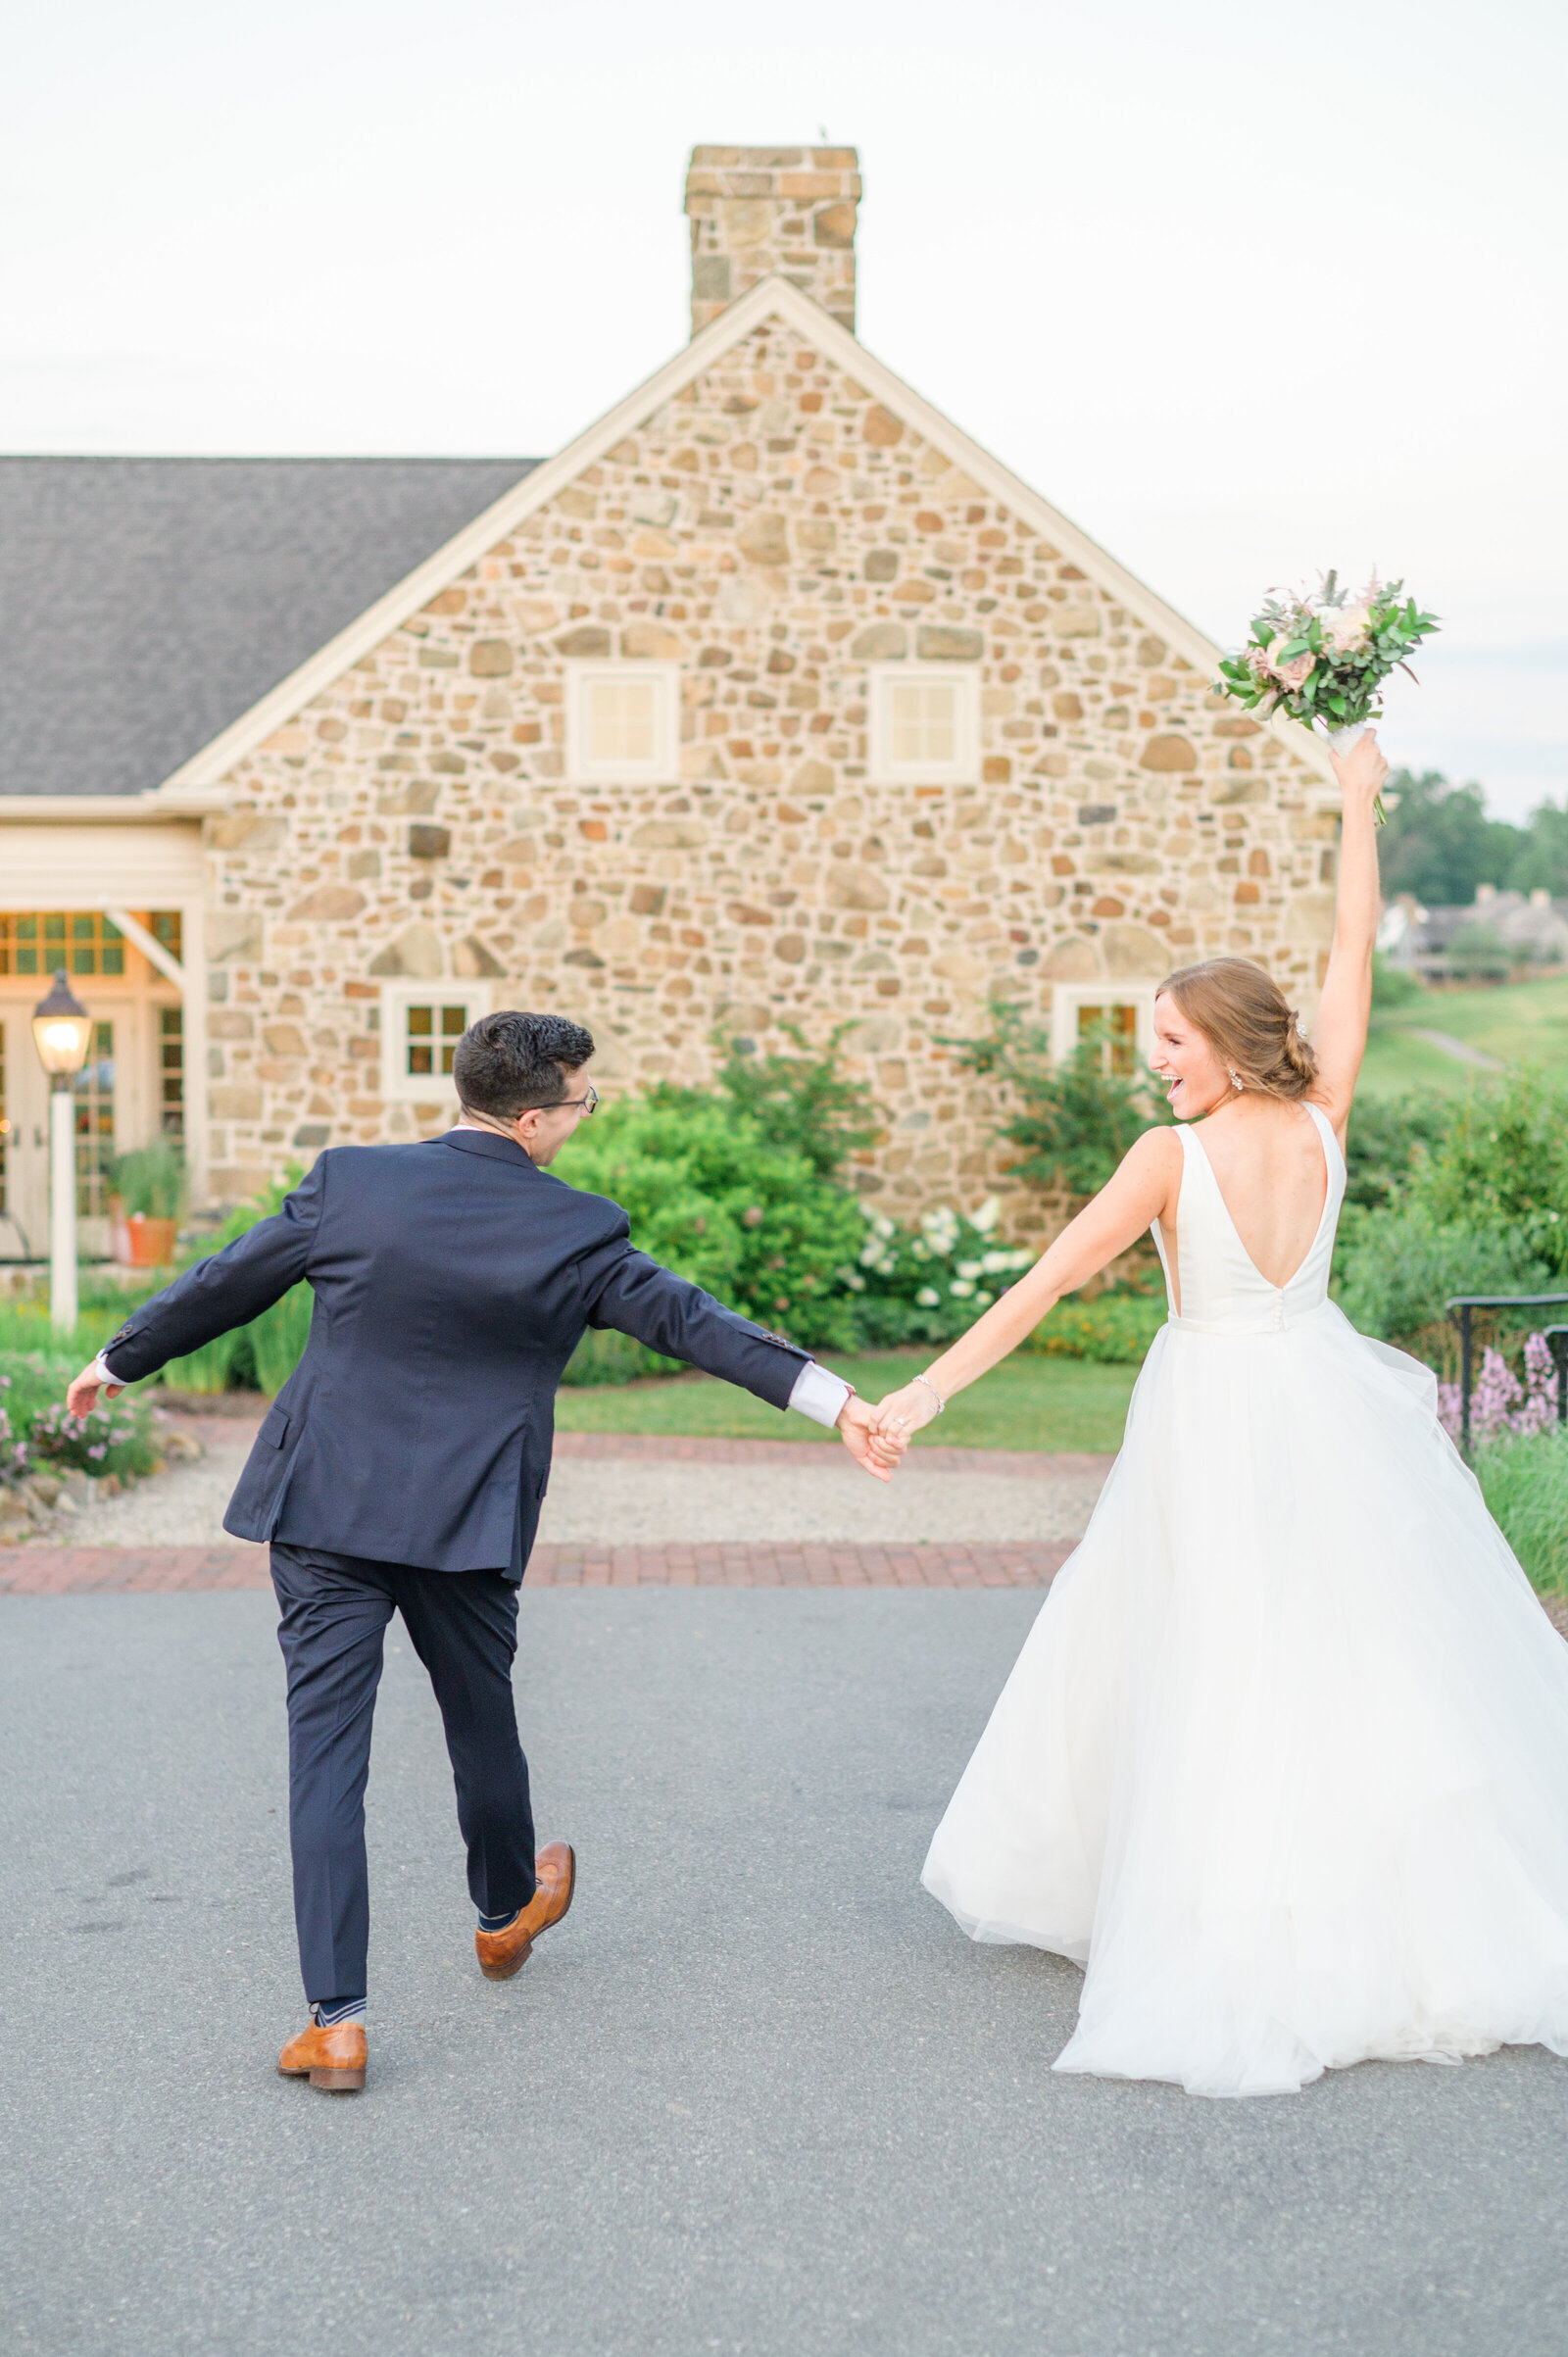 Couple celebrates in front of stone reception hall during wedding day photographed by Cait Kramer Photography